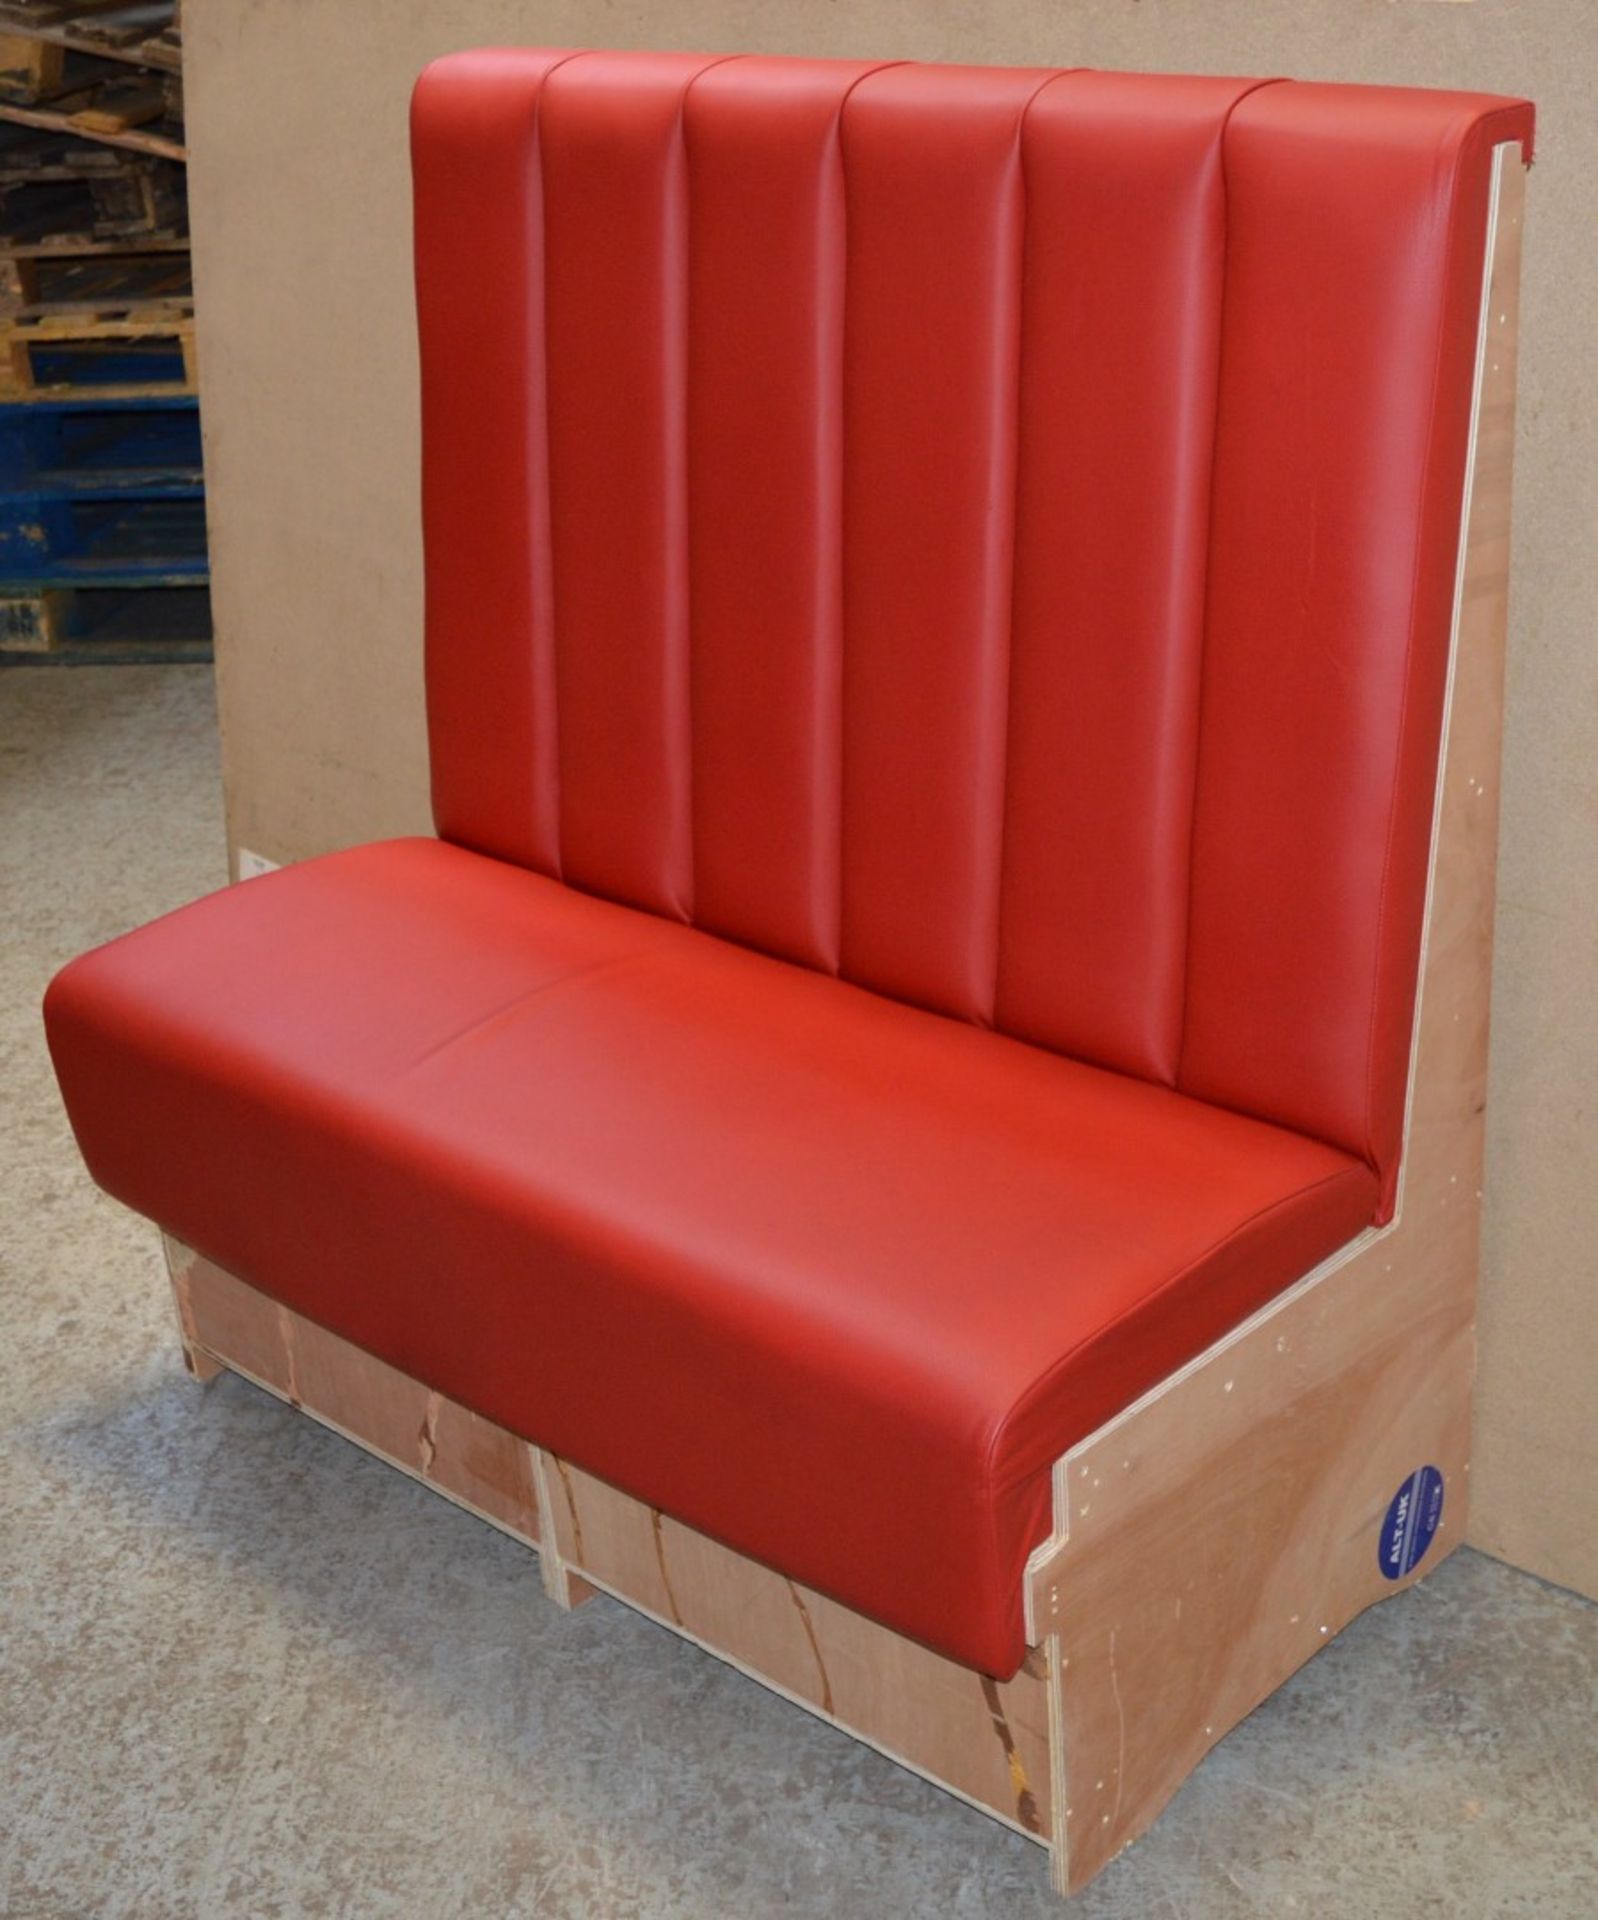 1 x High Back Single Seating Bench Upholstered in Red Leather - Sits upto Two People - High - Image 14 of 17